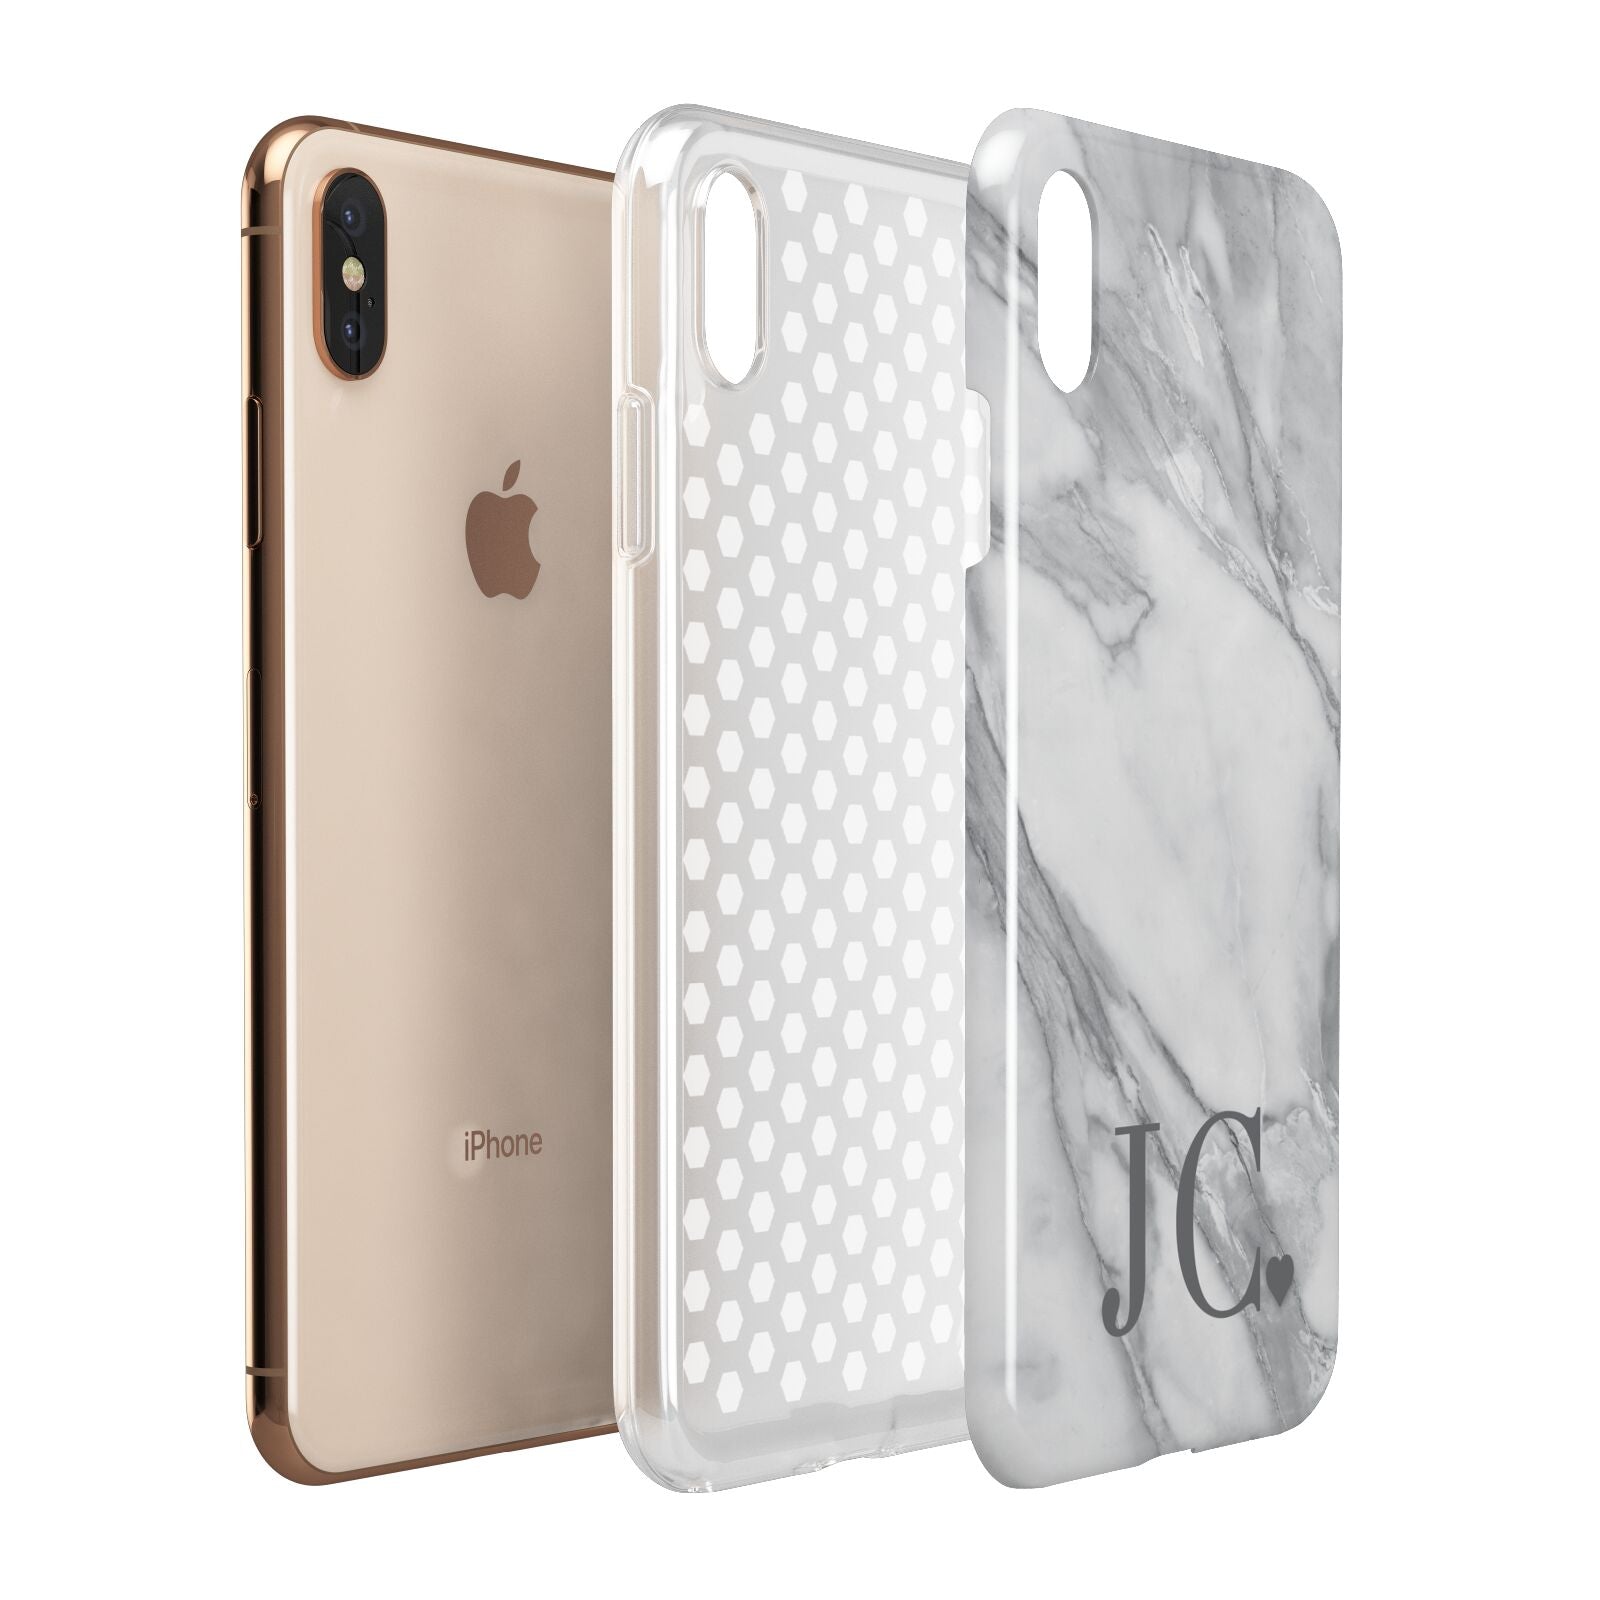 Initials Love Heart Apple iPhone Xs Max 3D Tough Case Expanded View